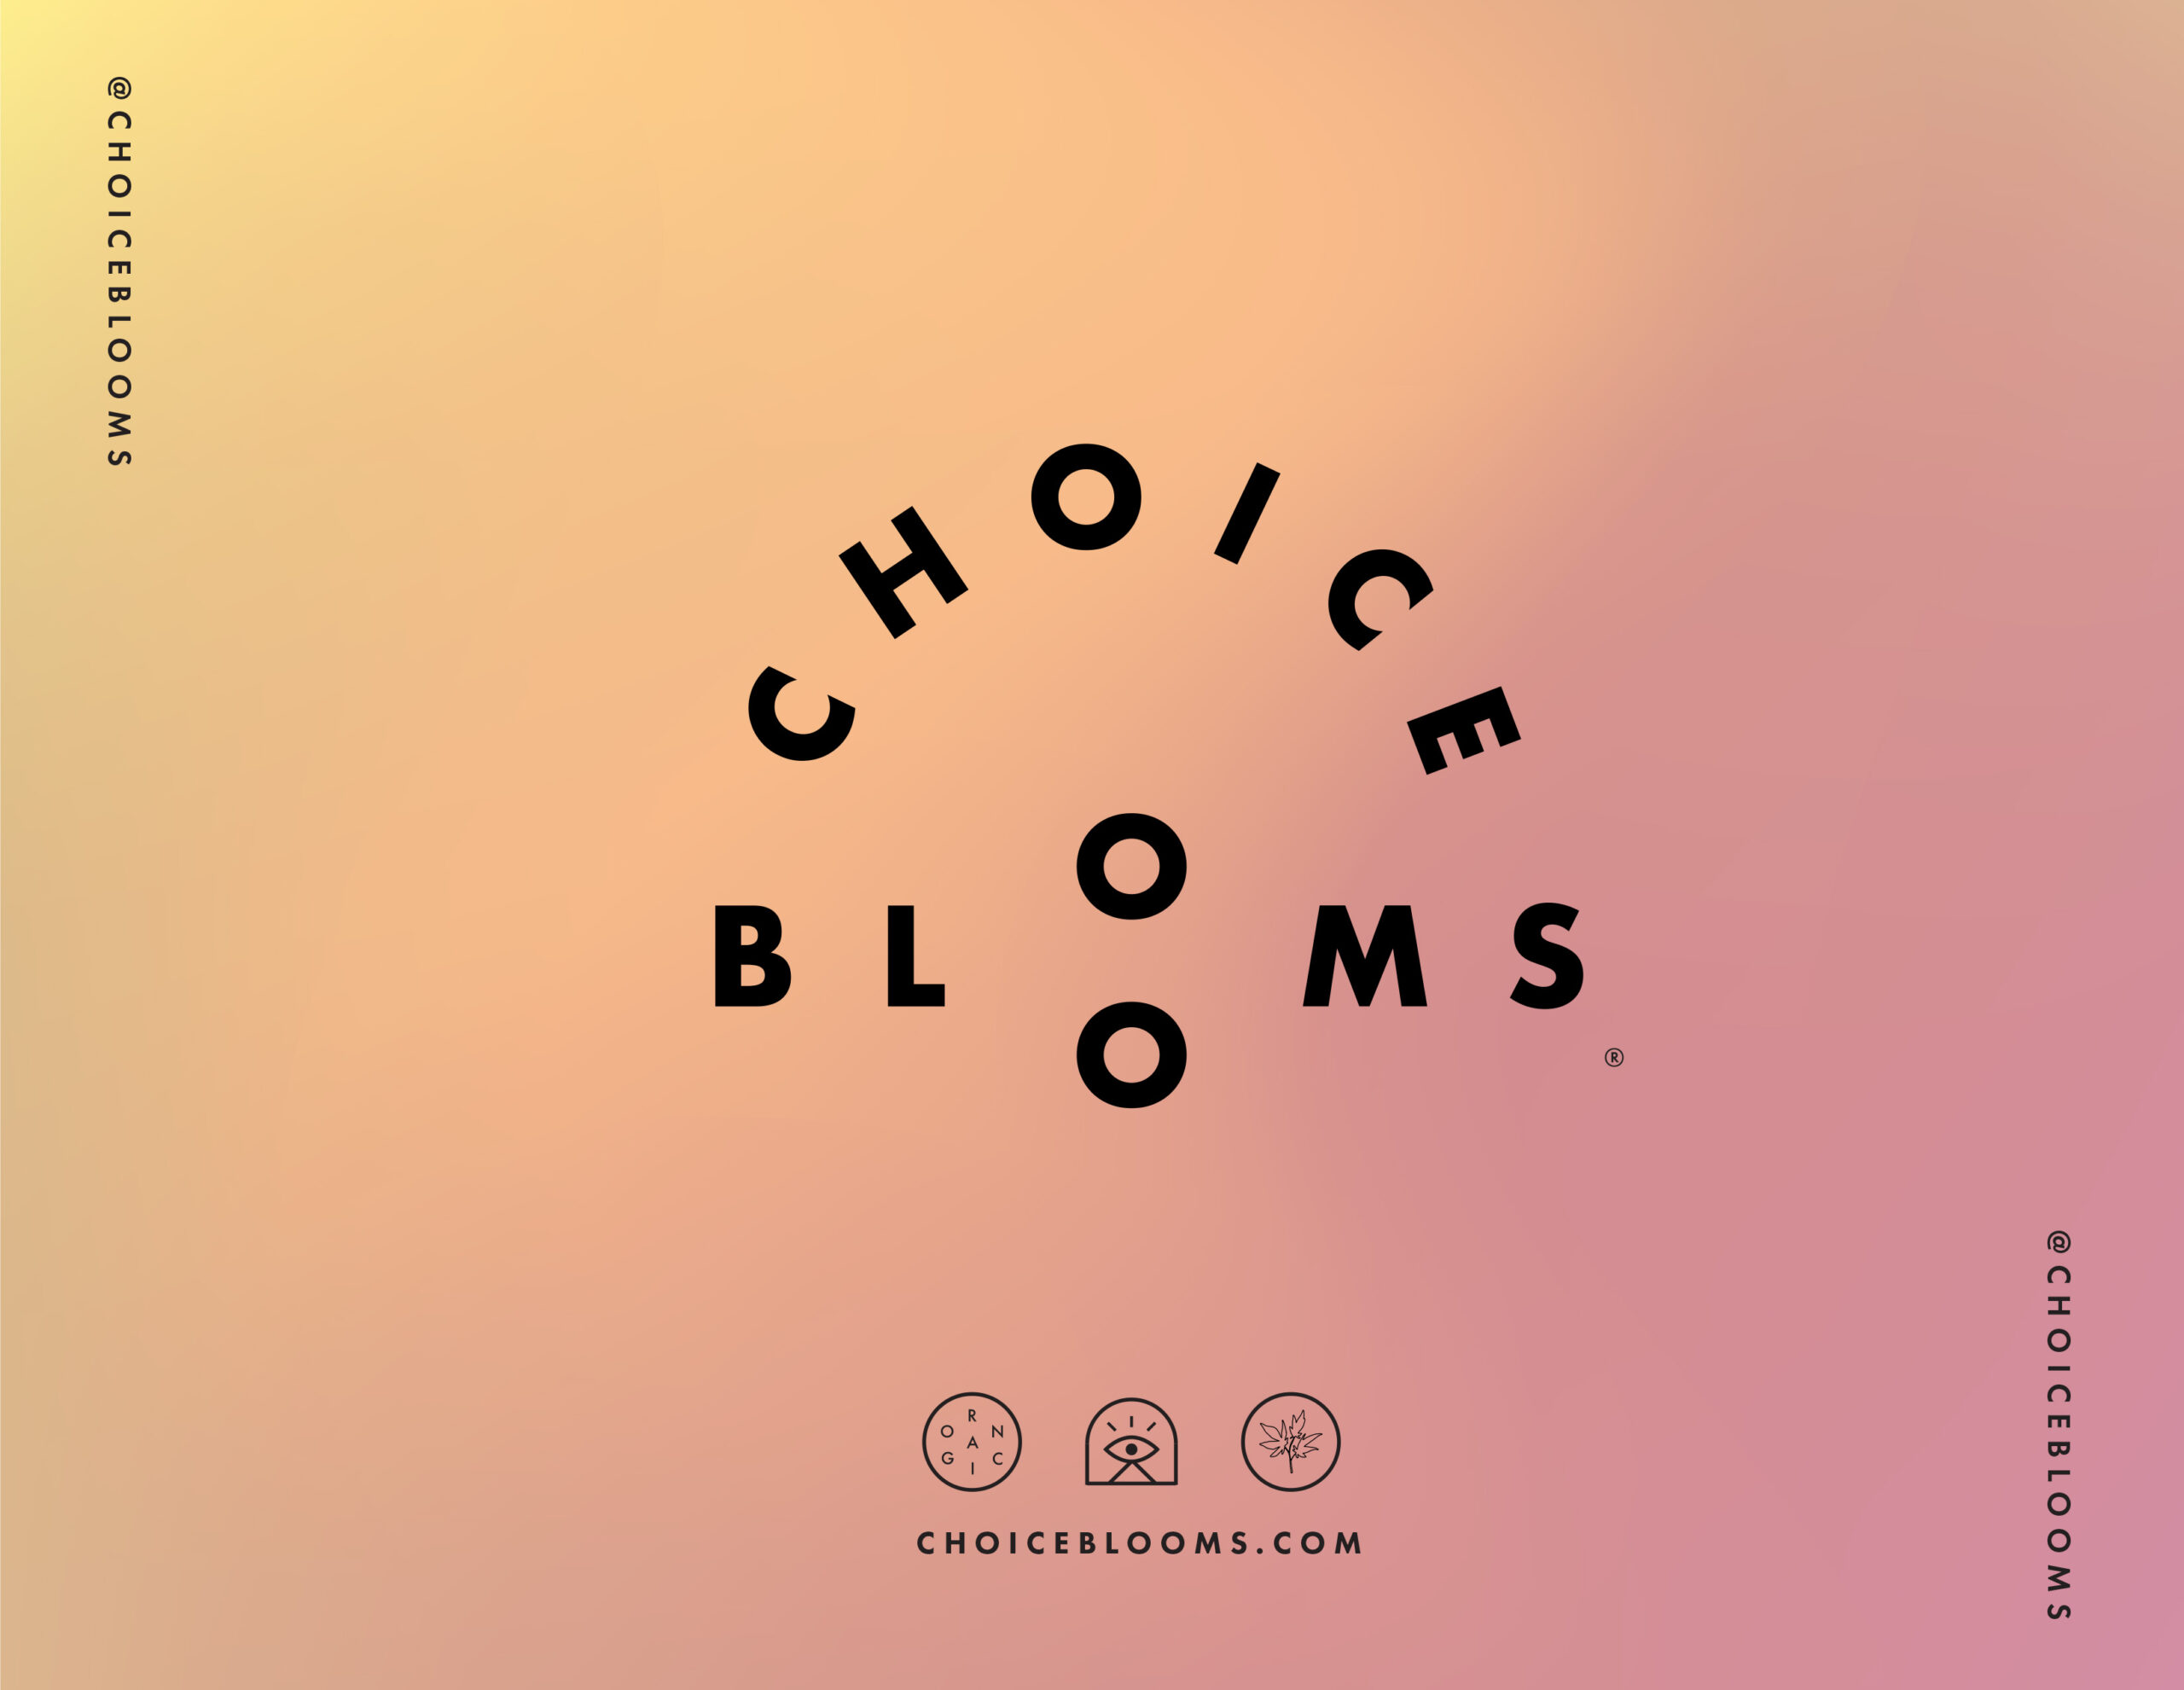 Choice Blooms